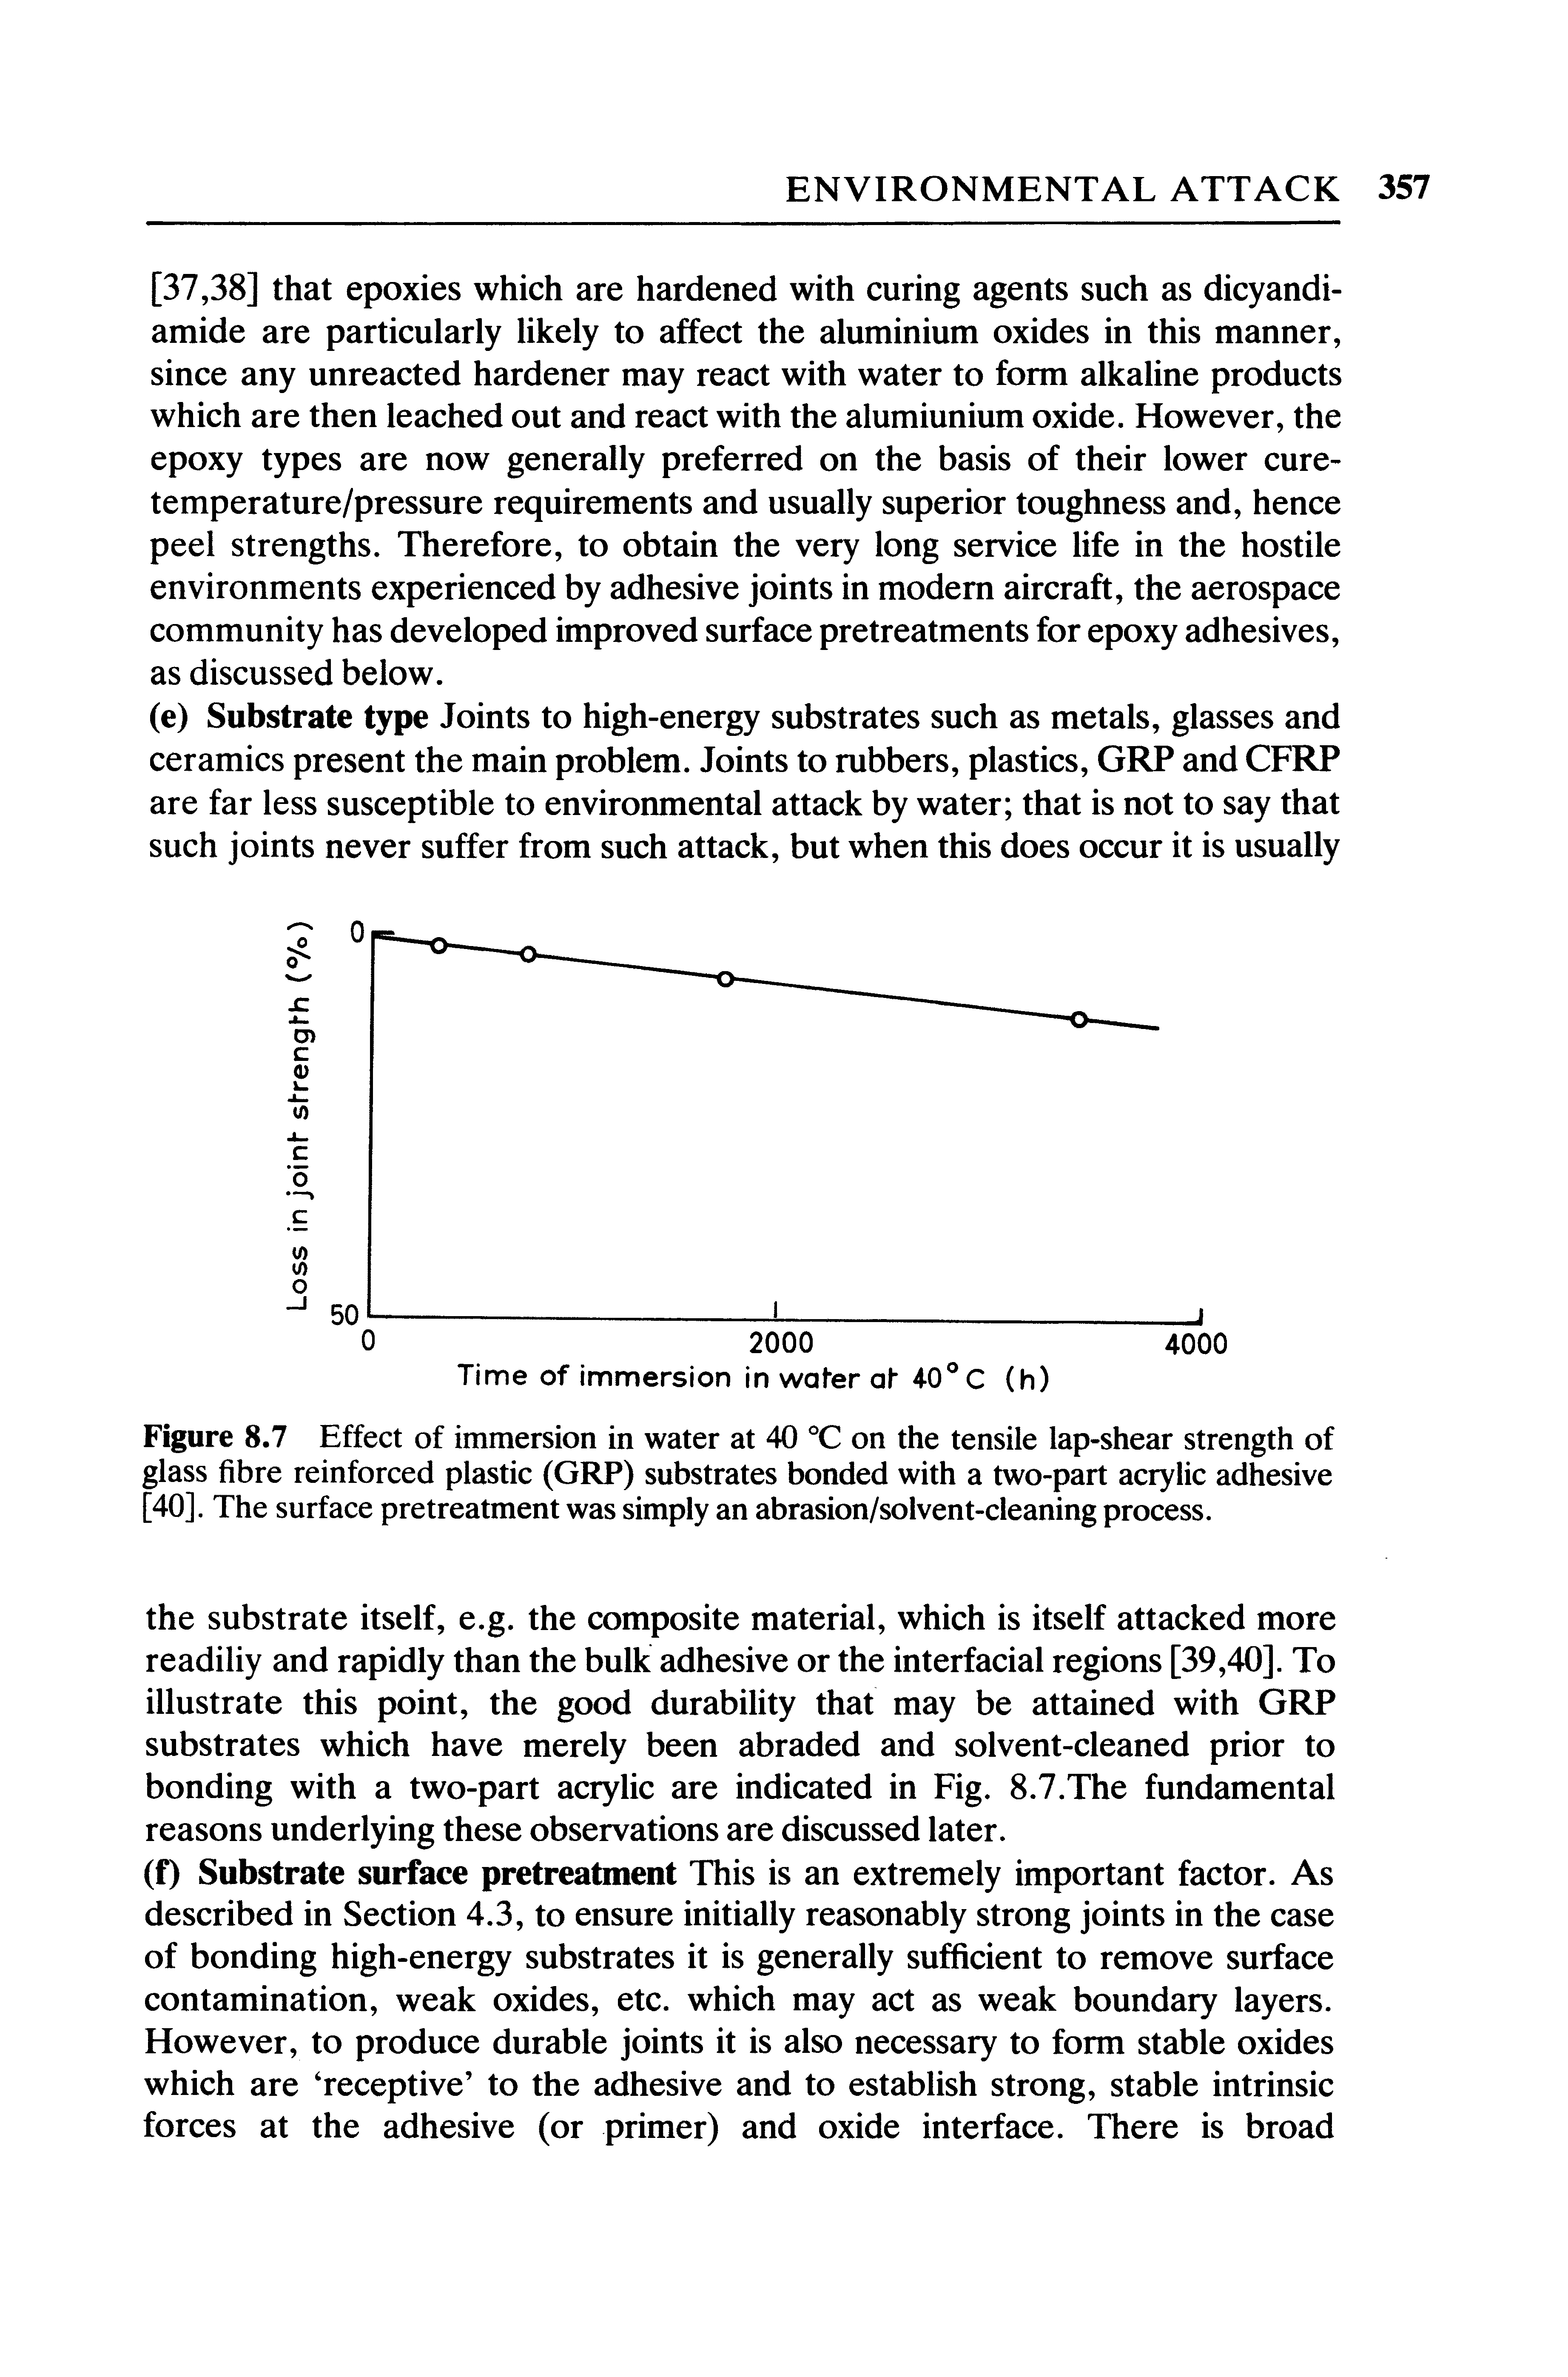 Figure 8.7 Effect of immersion in water at 40 °C on the tensile lap-shear strength of glass fibre reinforced plastic (GRP) substrates bonded with a two-part acrylic adhesive [40]. The surface pretreatment was simply an abrasion/solvent-cleaning process.